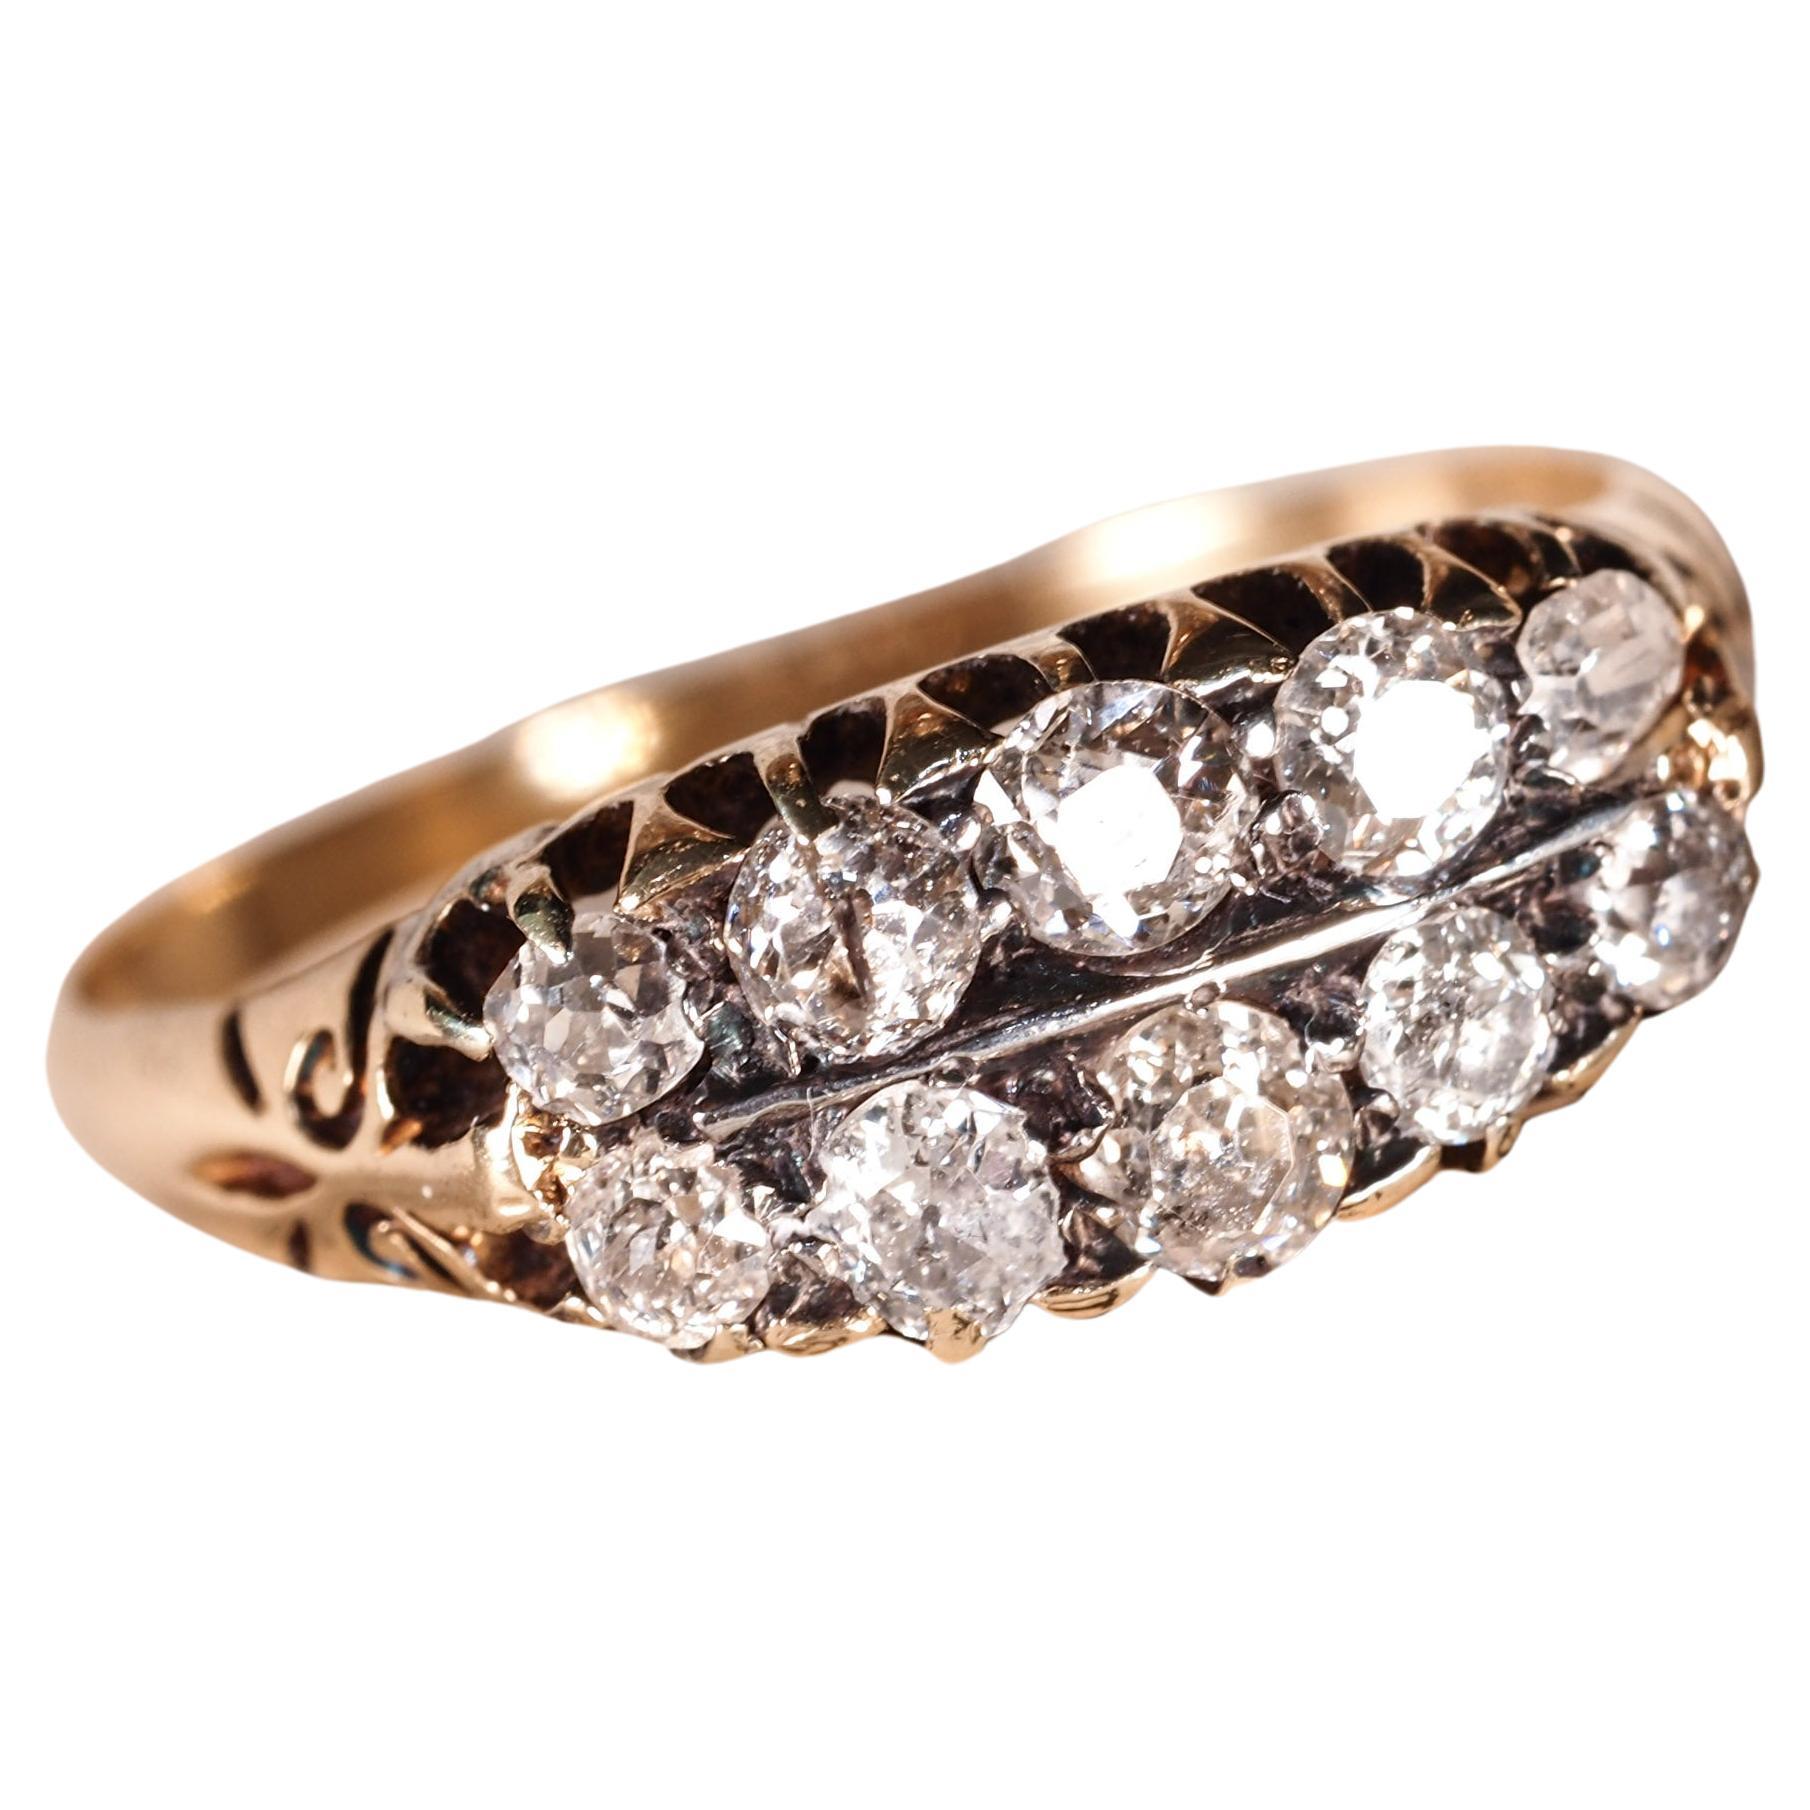 Antique Victorian 18K Gold Diamond Ring Old Cut - Boat Shaped c.1890 For Sale